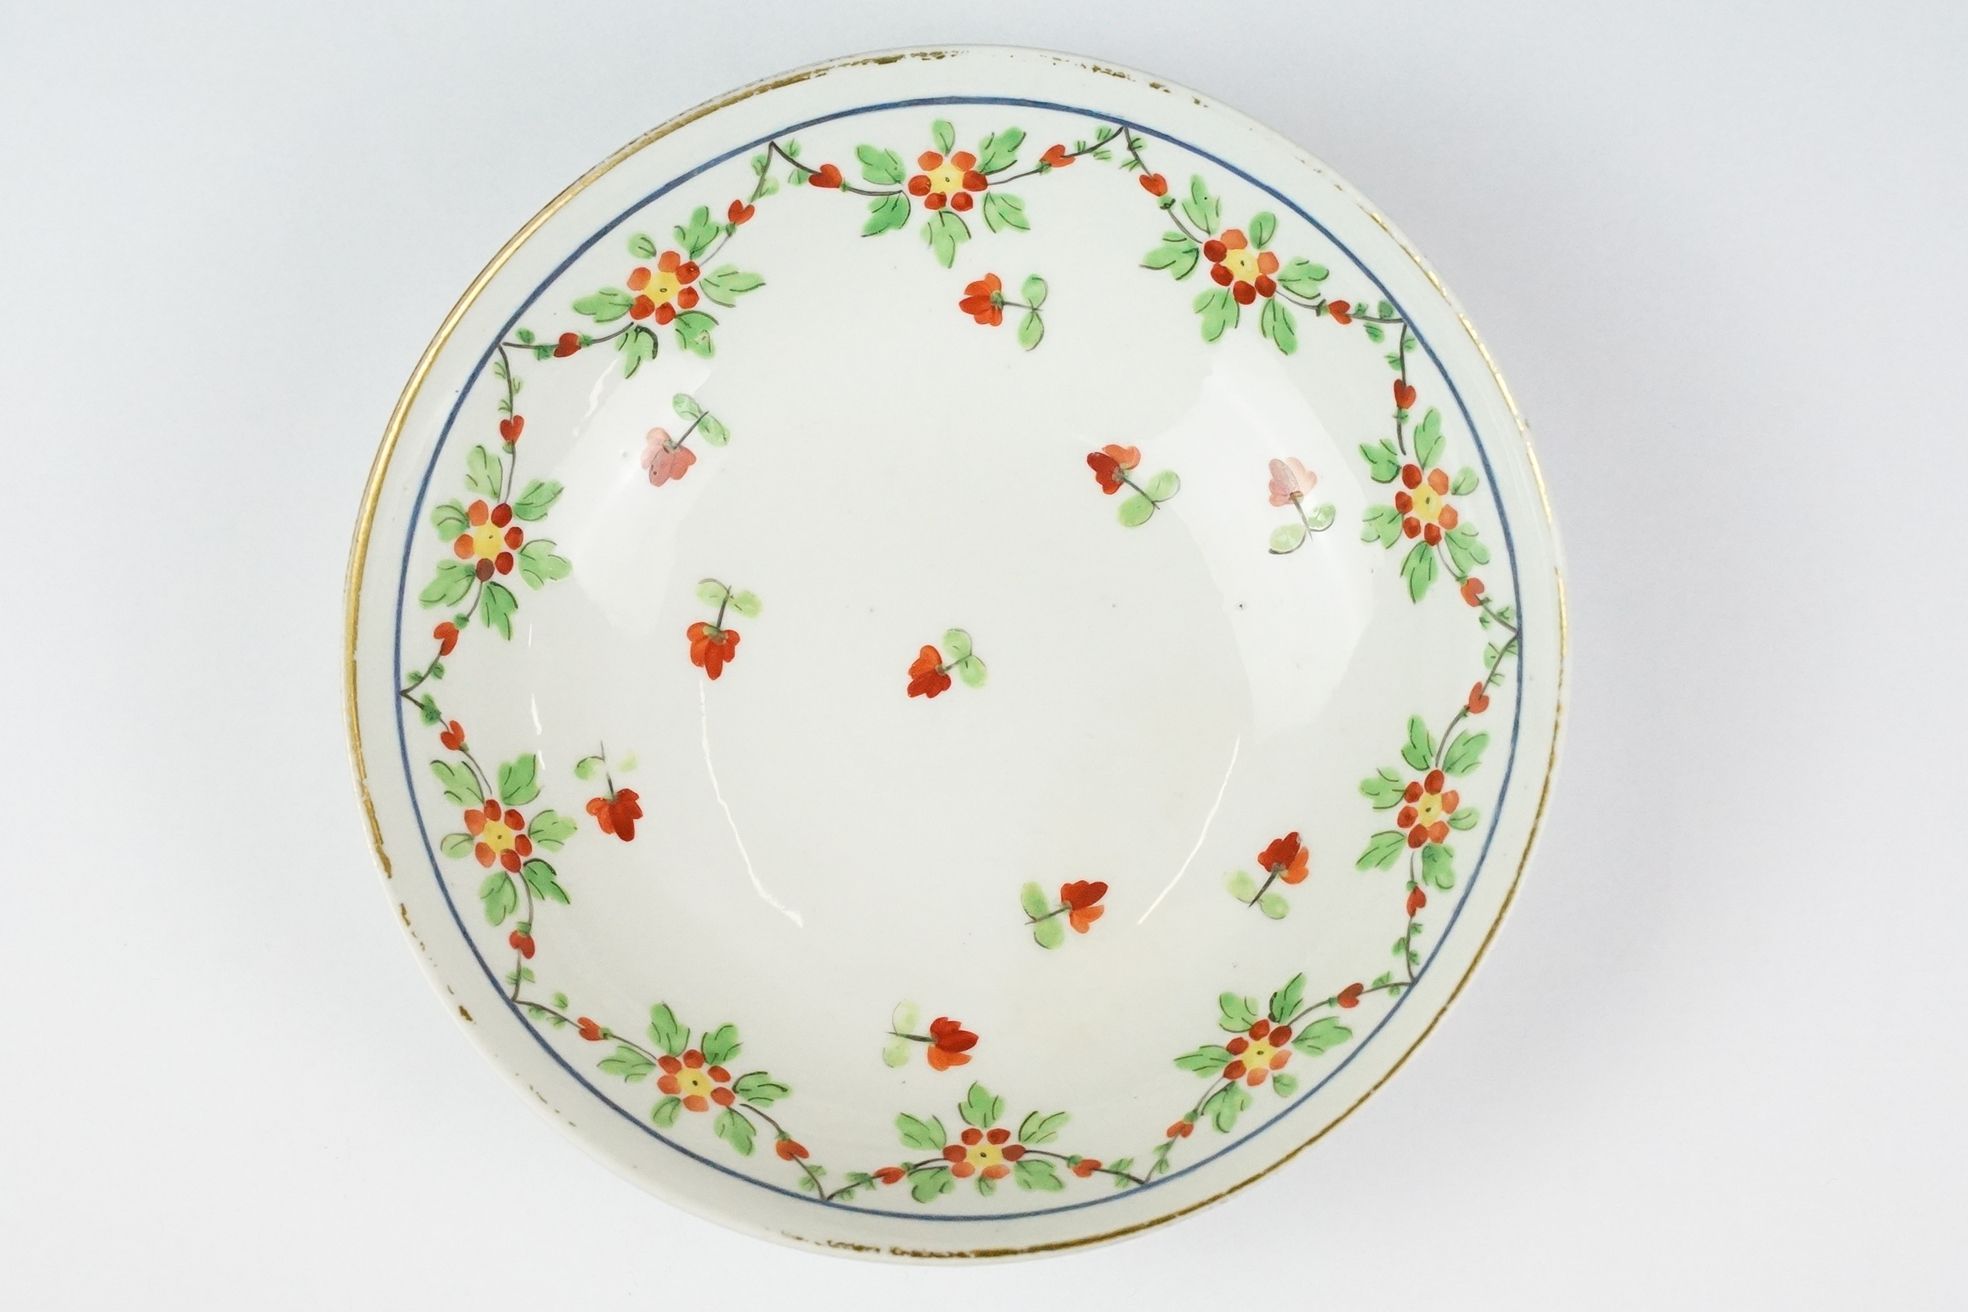 Swansea pottery cup and saucer, hand painted with a floral garland, the saucer, 13.5cm diameter - Image 6 of 7